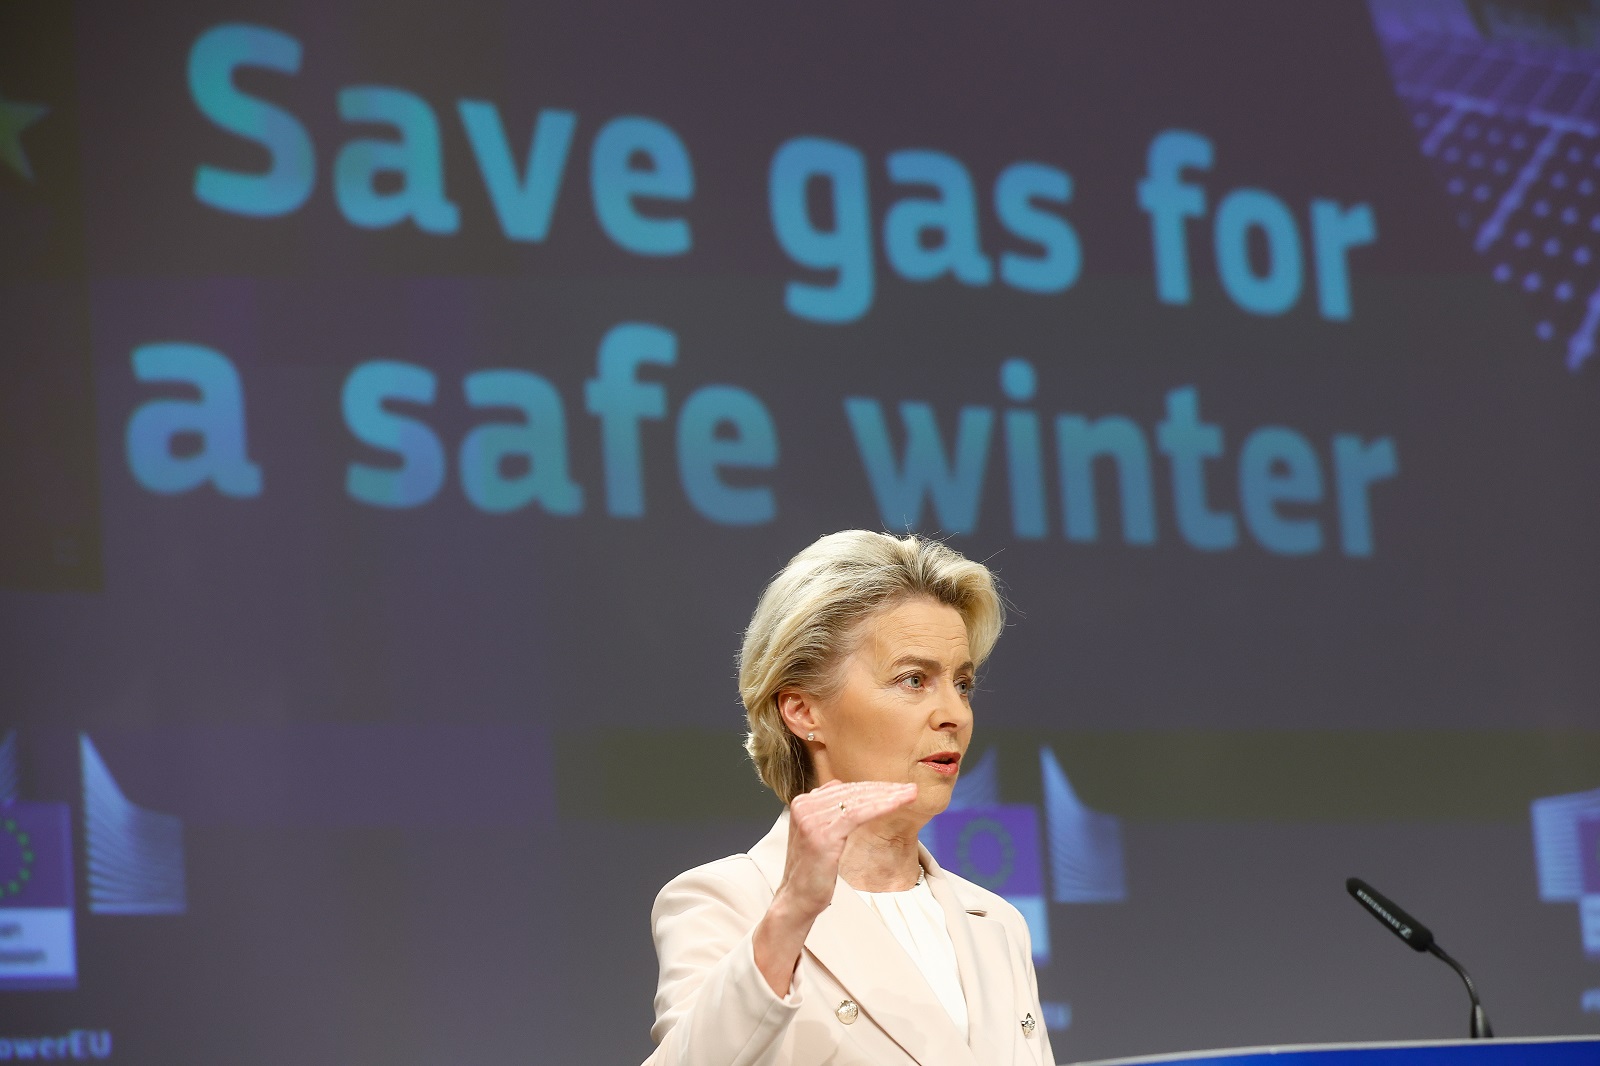 epa10081678 European Commission President Ursula von der Leyen attends a press conference on the 'Save gas for safe winter' pacakge at the European Commission in Brussels, Belgium, 20 July 2022.  EPA/STEPHANIE LECOCQ